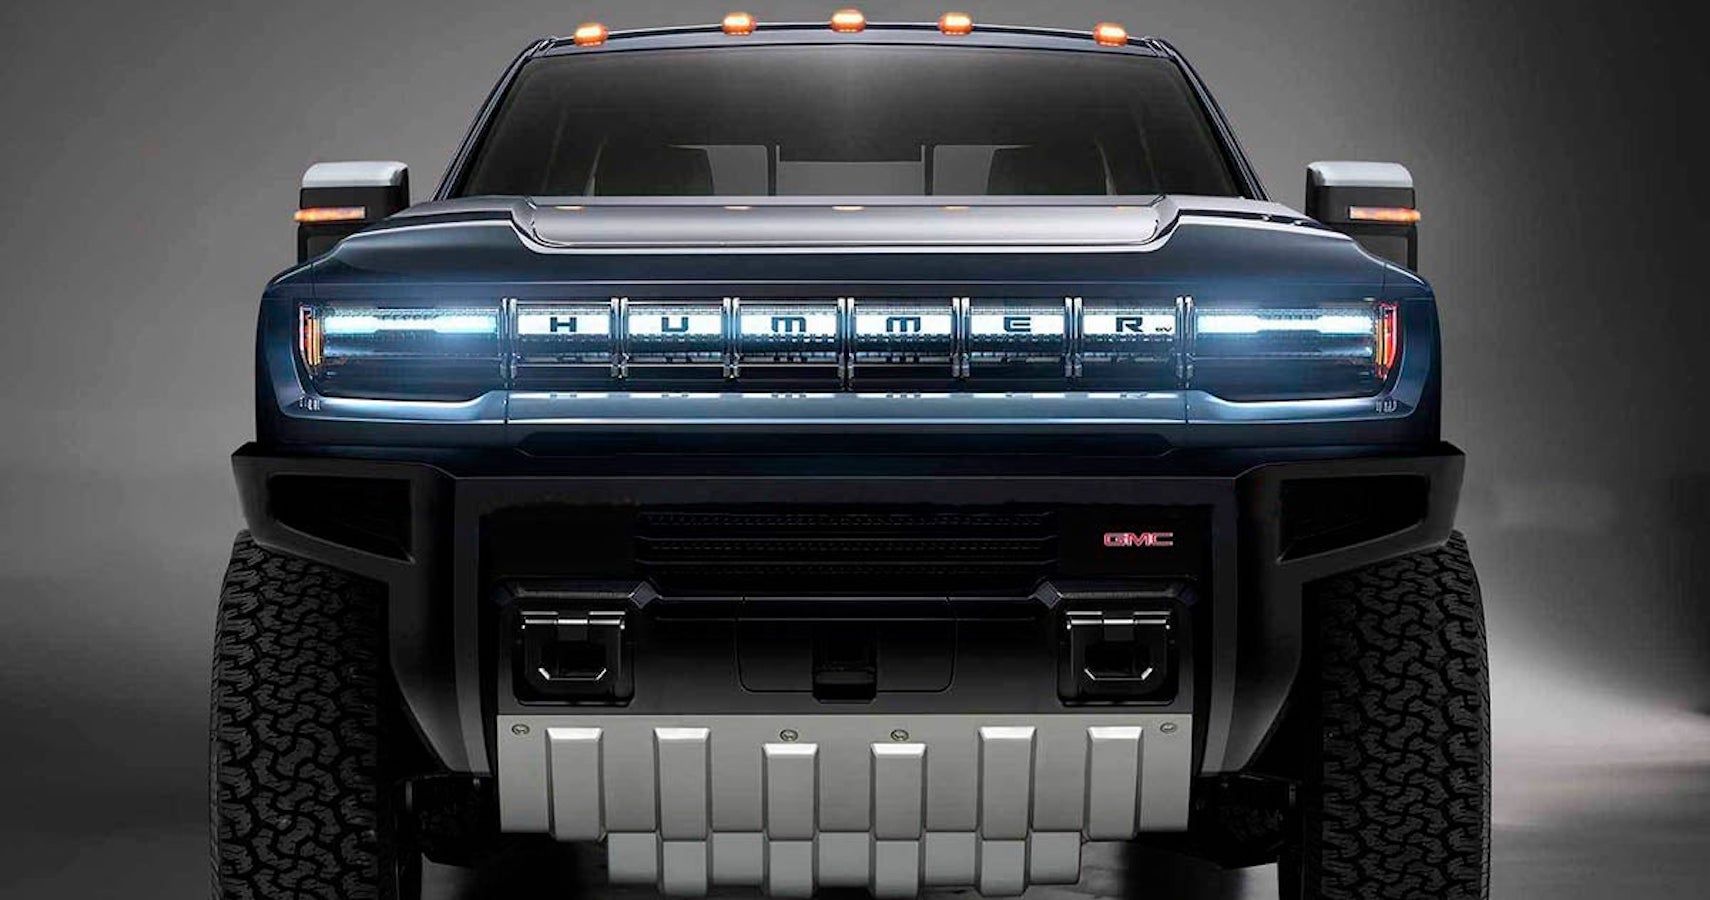 GMC Hummer EV: Everything We Know 24 Hours Before Its World Premiere